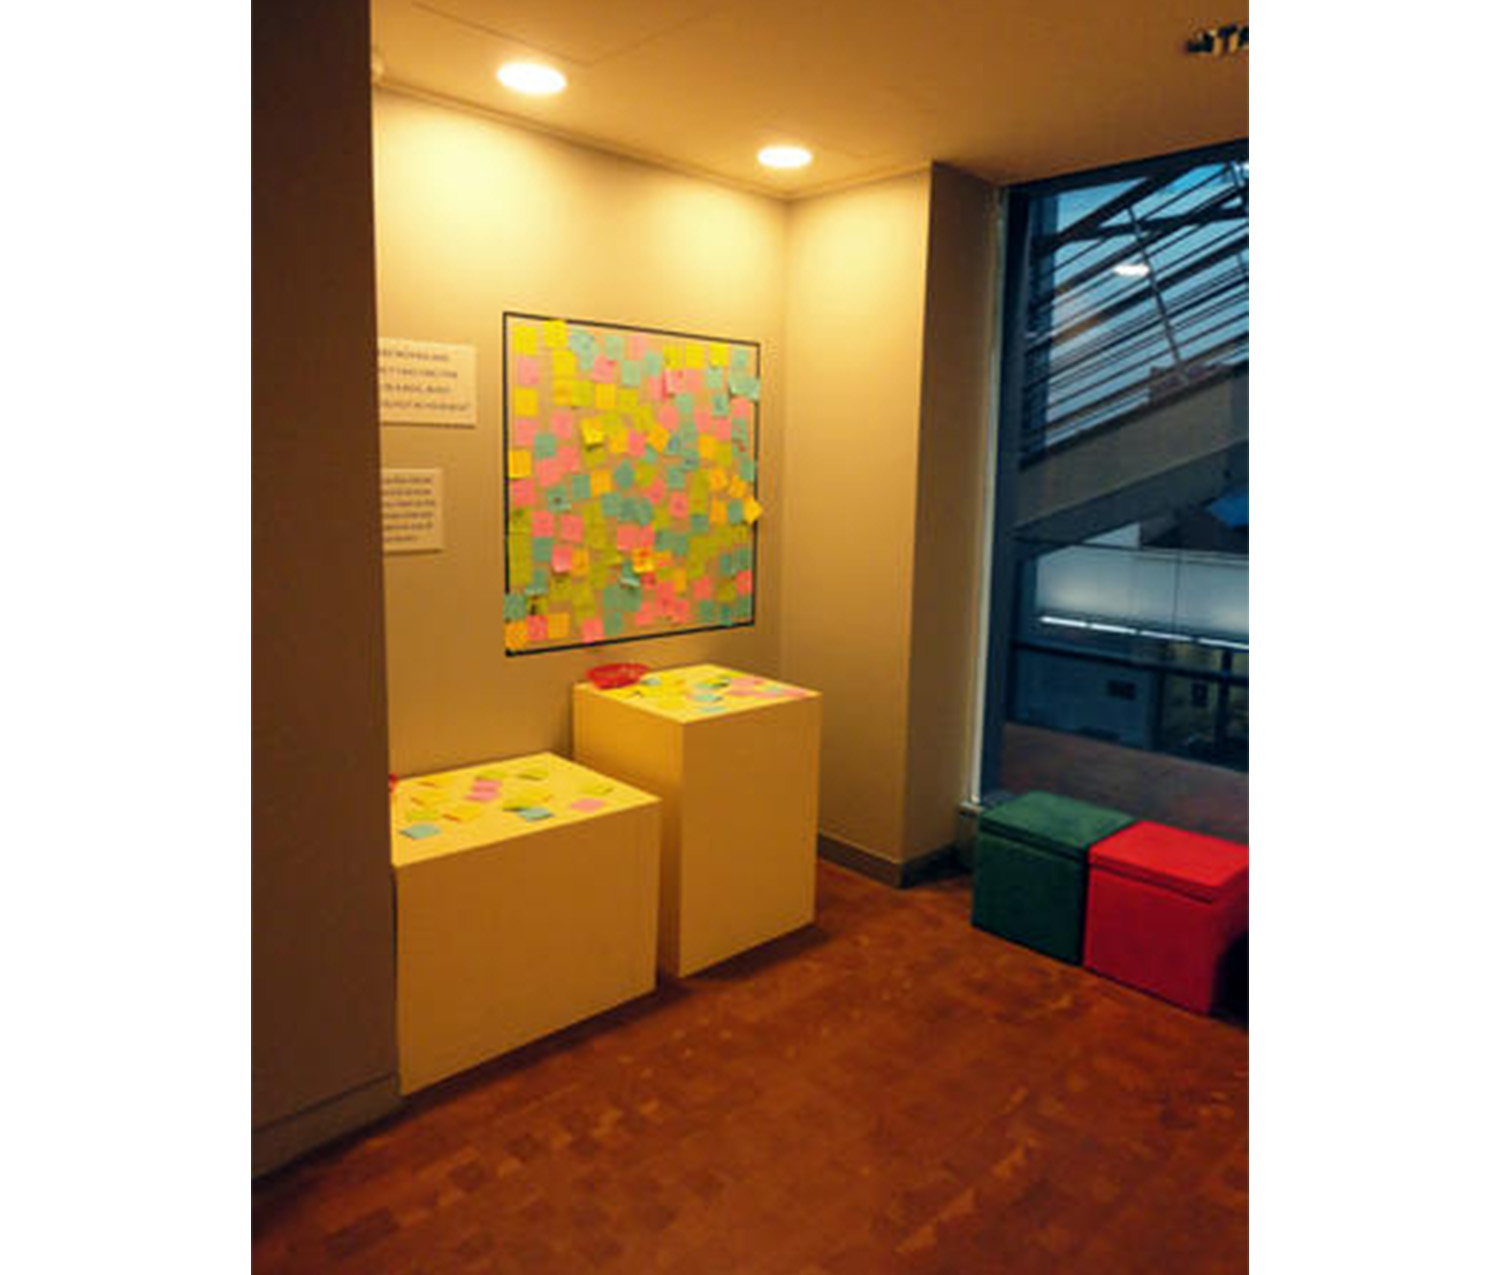 wall covered in colorful sticky notes. two countertops underneath the wall display with sticky notes and pens laid out on them